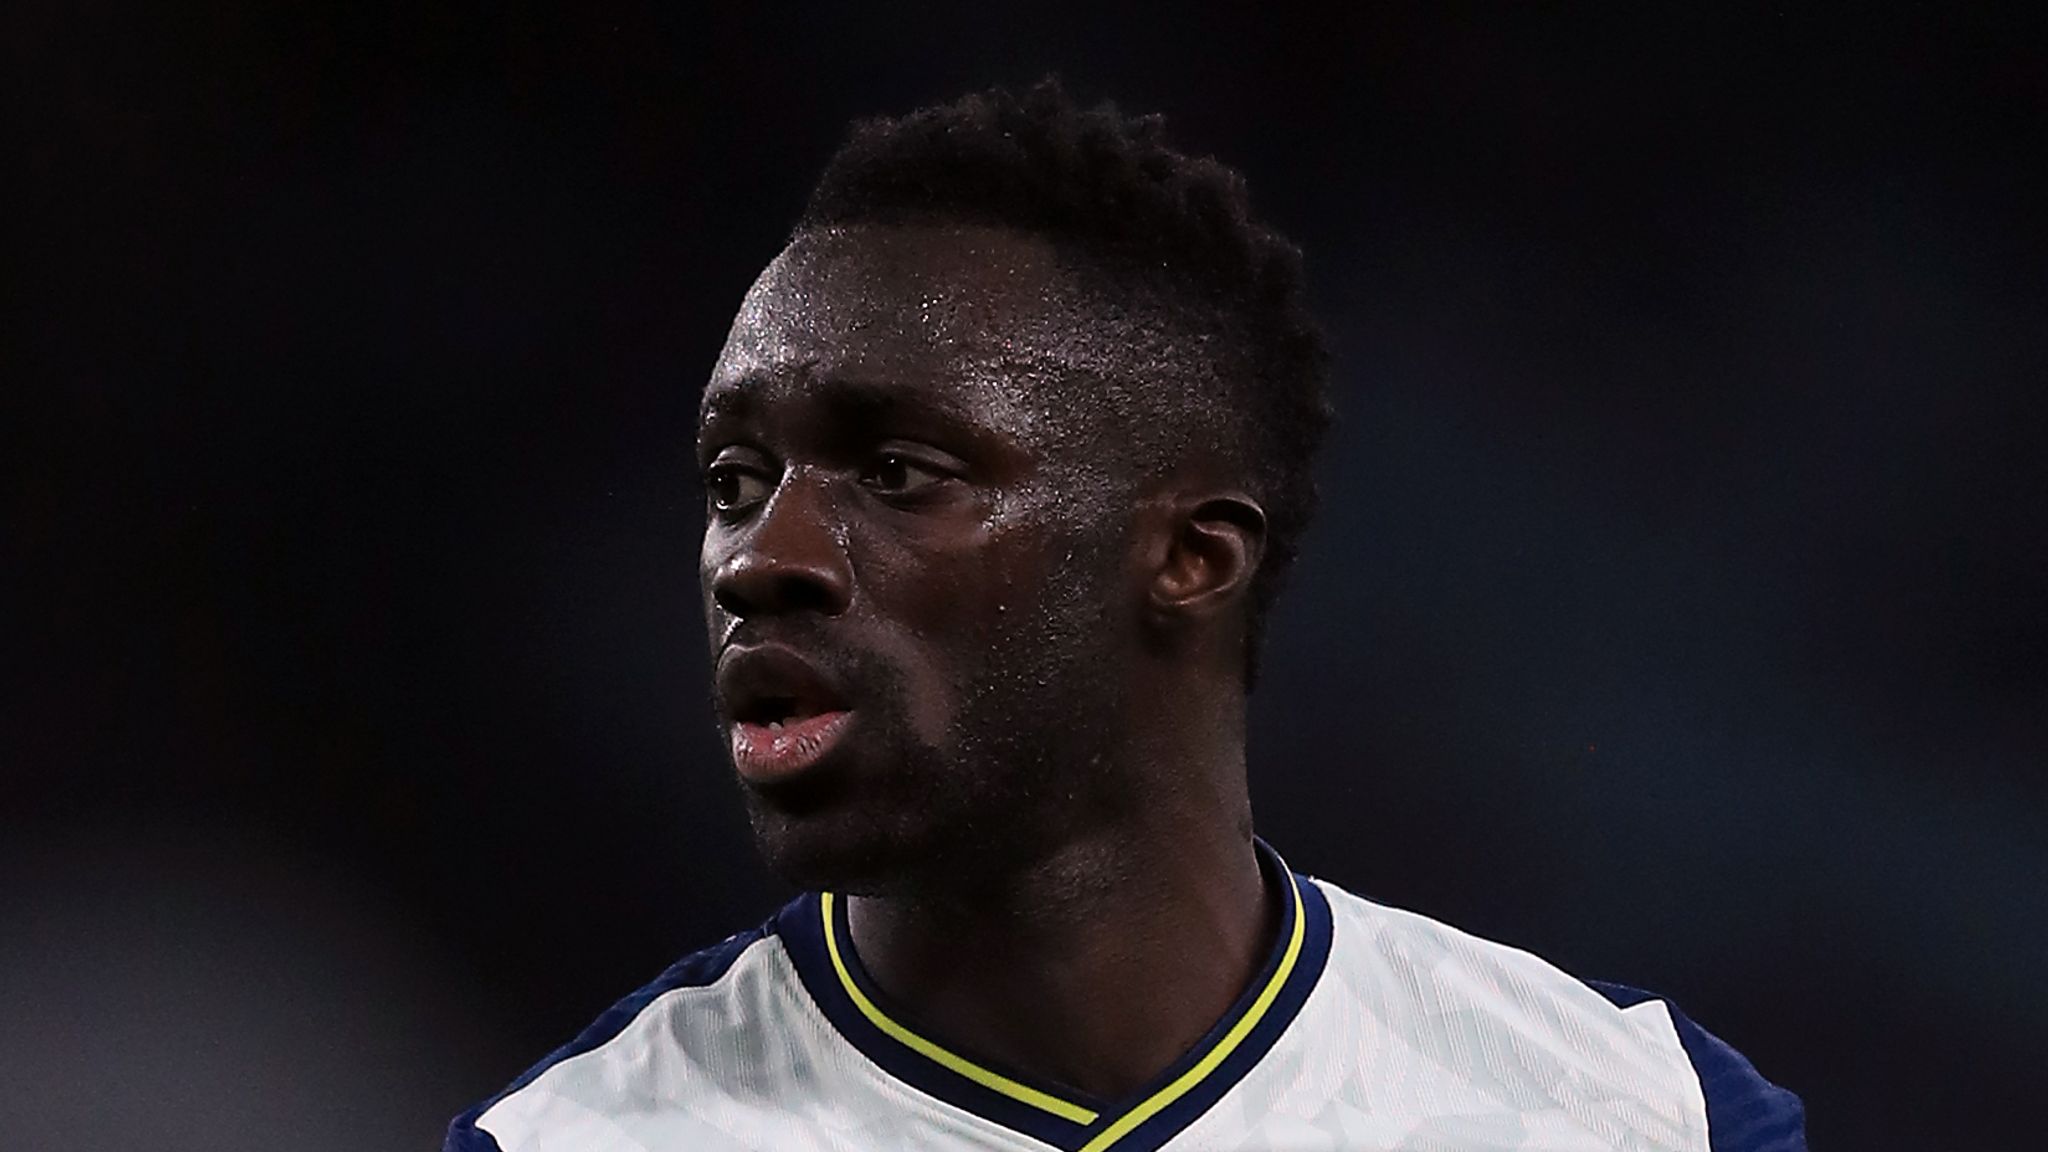 Davinson Sanchez racially abused on Instagram after Tottenham's draw at Newcastle